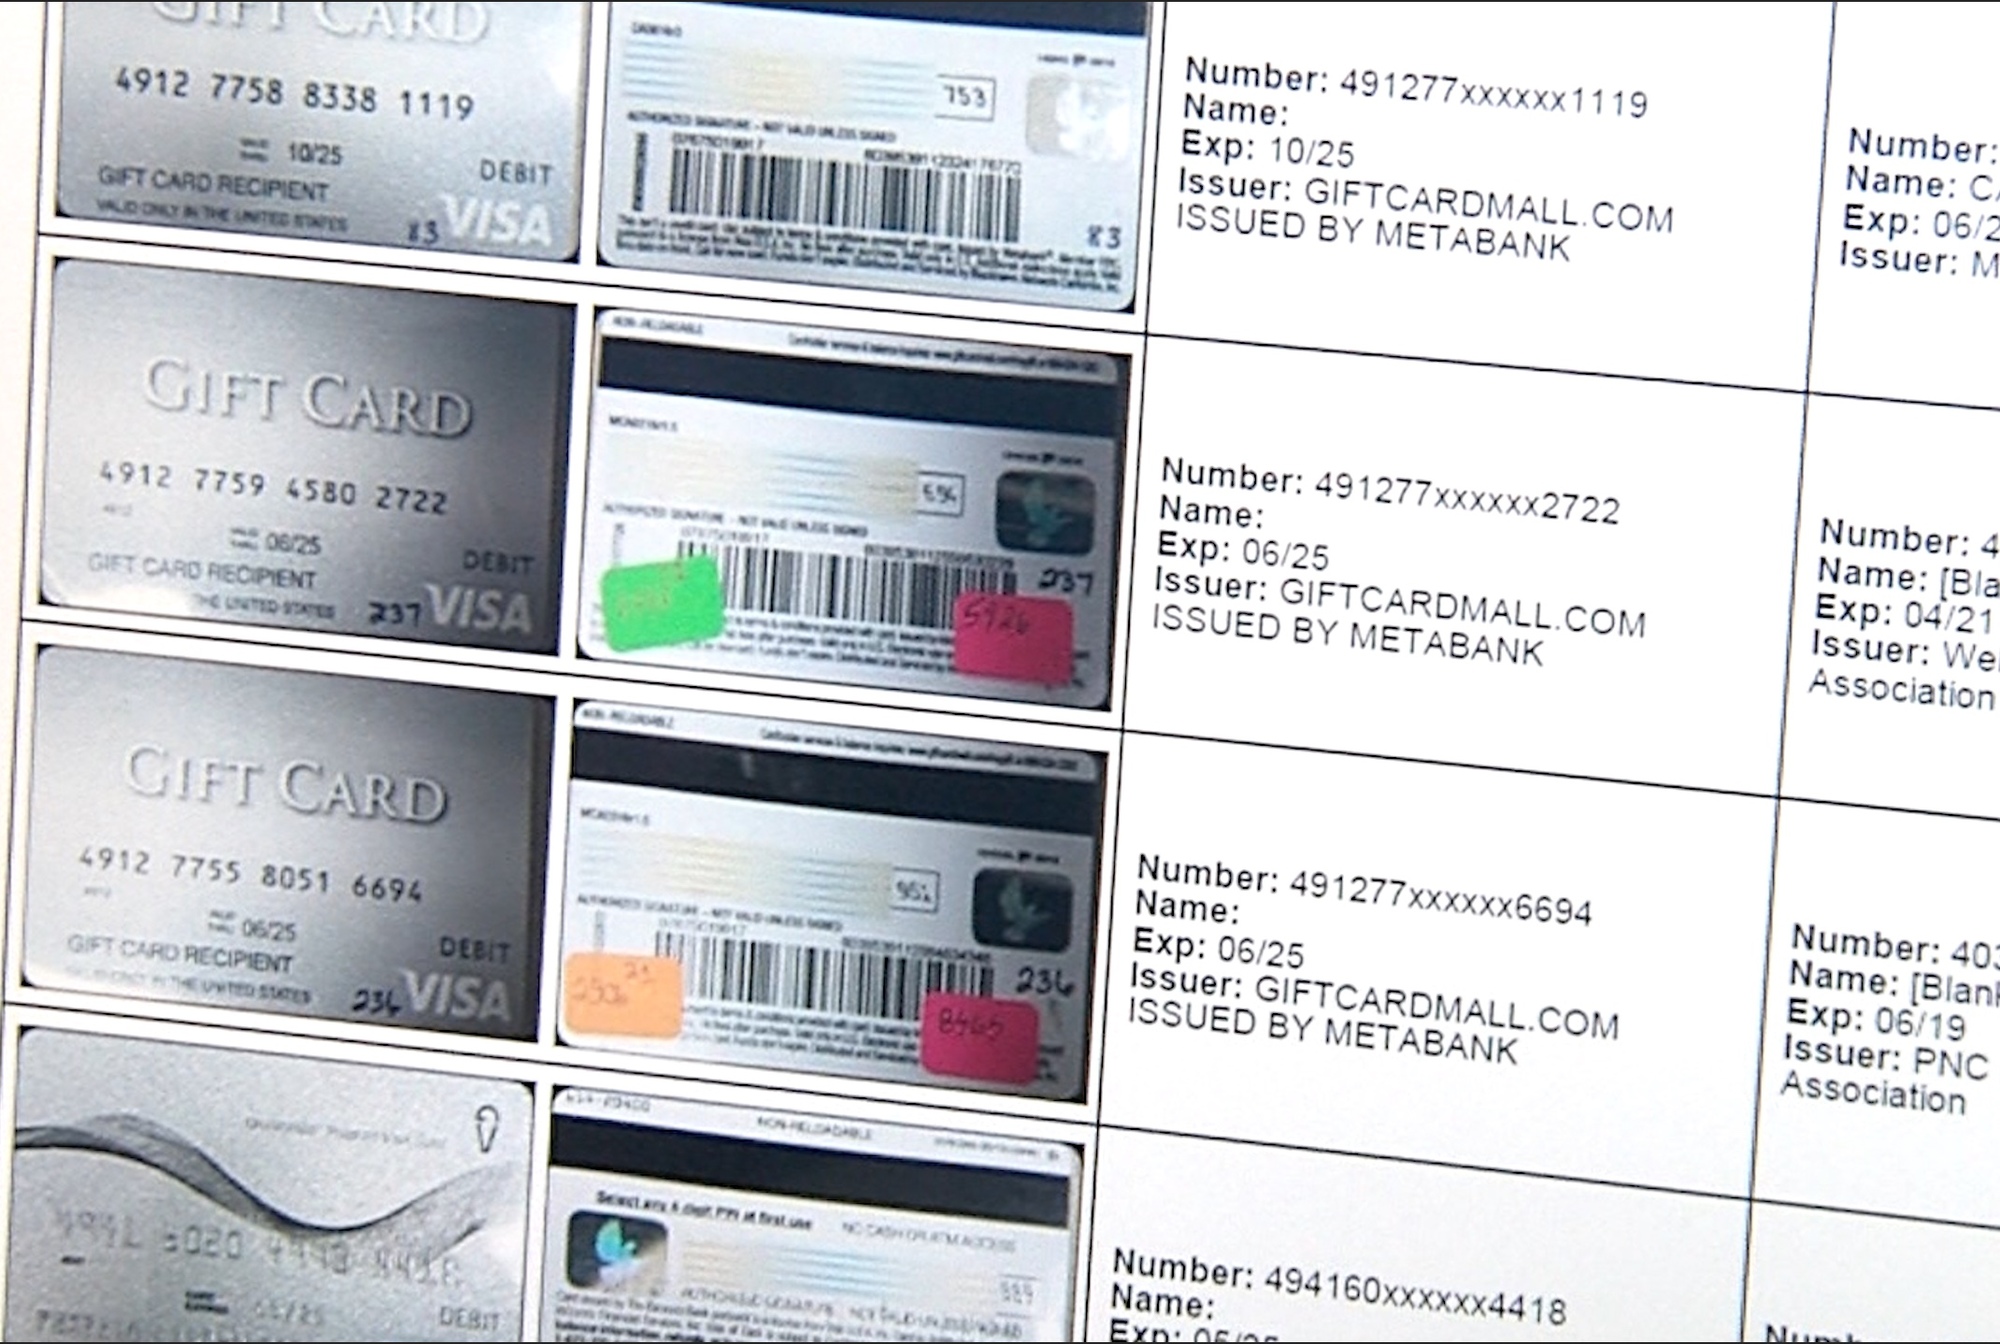 The ERAD Prepaid Card Reader produces a detailed report on the status of each card and which banks had been victimized by the suspects in the case.